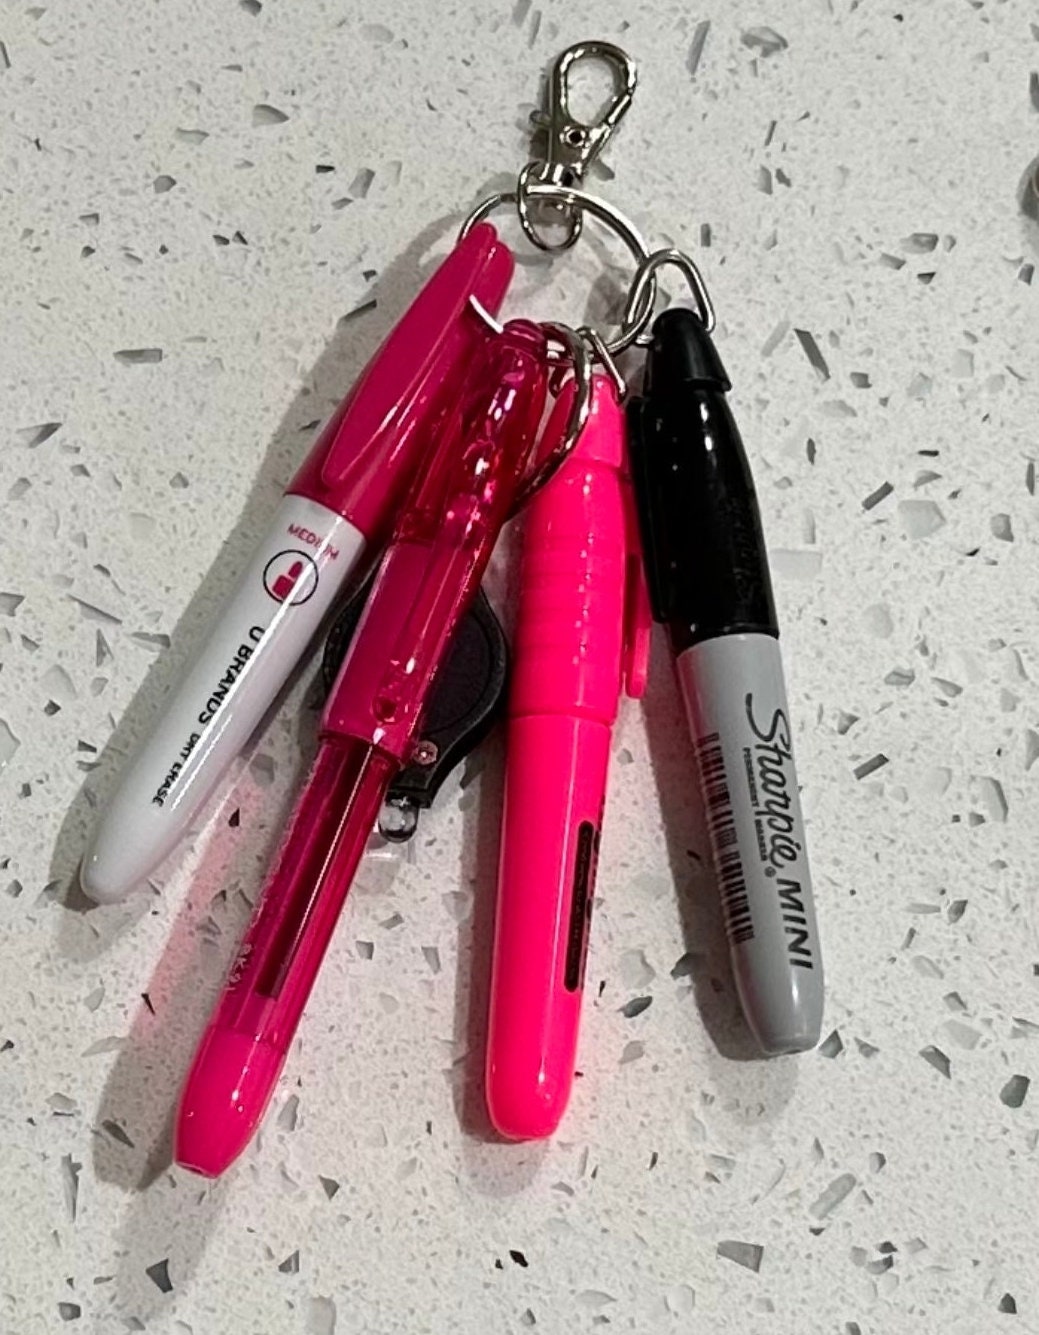 Sharpie Mini and RSVP Mini Ballpoint Pen with Lanyard Clip for badge reel,  small marker and pen for ID, miniature marker, color nurse pen